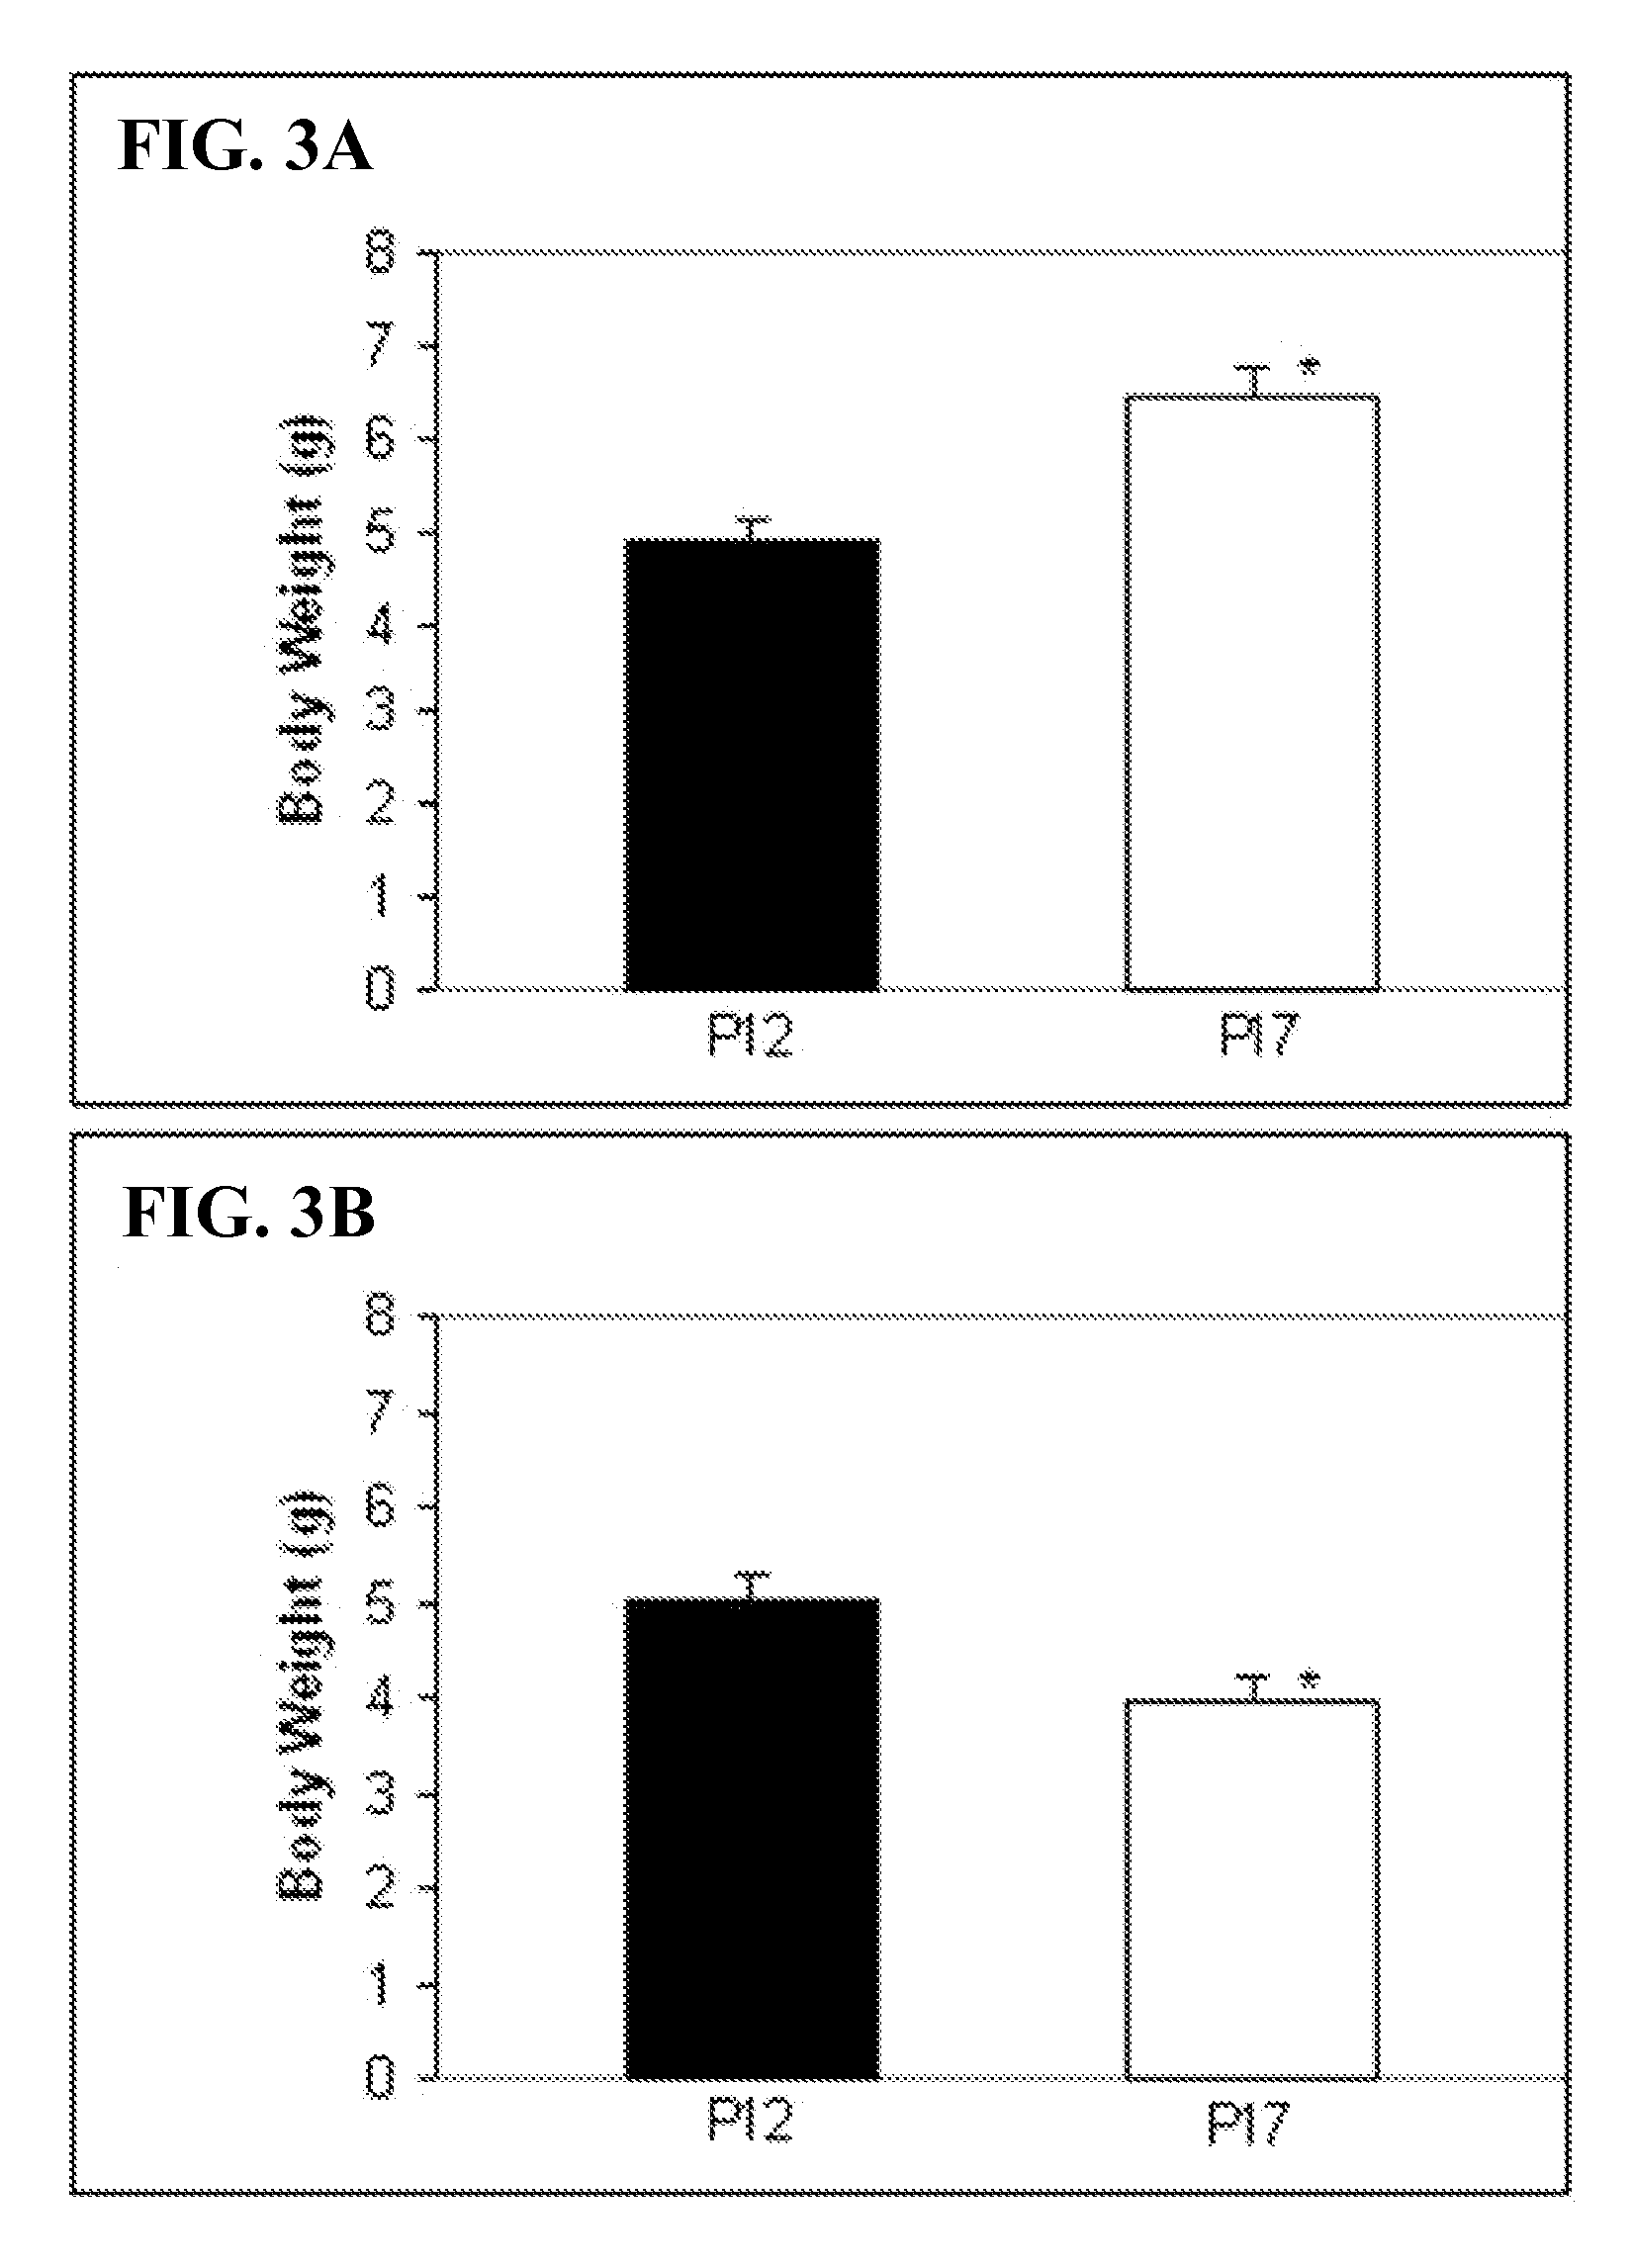 Method of using calcitriol for treating intraocular diseases associated with angiogenesis